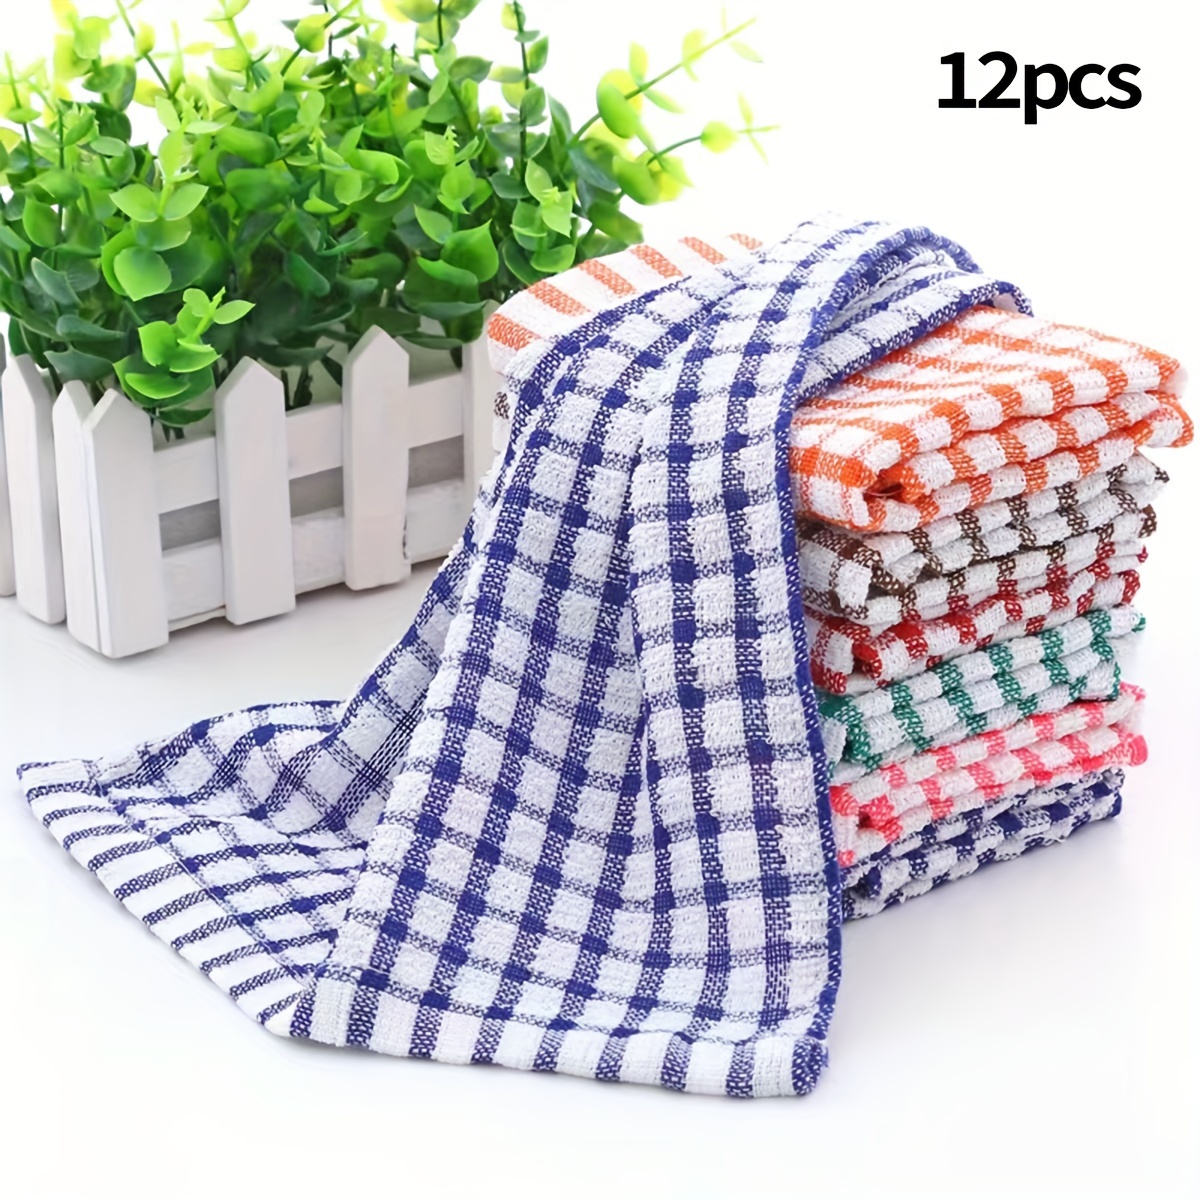 

6/12-pack Cotton Dish Cloths, Contemporary Style, Lightweight Oblong Kitchen Cleaning Towels, Hand Wash Only, Woven Weaving Method, Space Theme, Reusable Dish Towels.